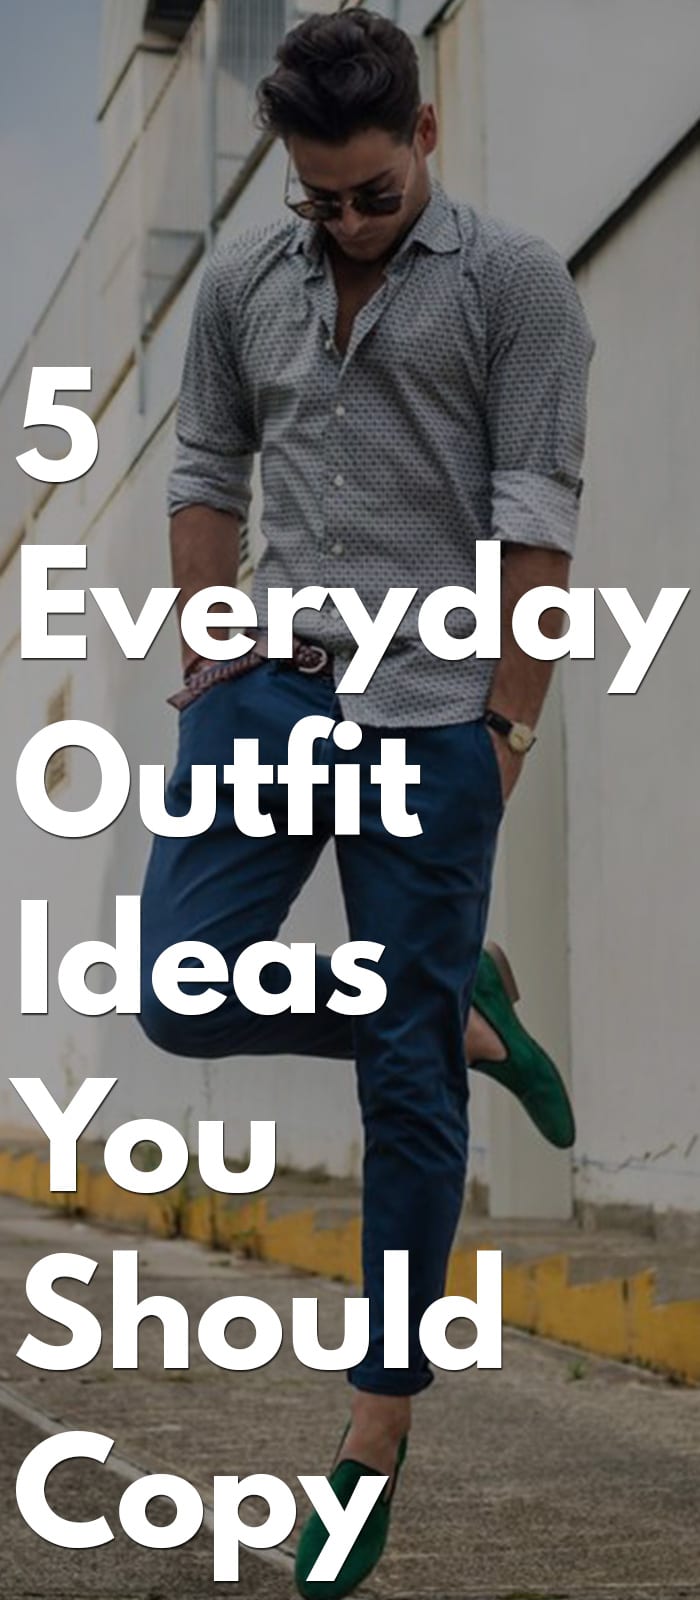 5 Everyday Outfit Ideas You Should Copy